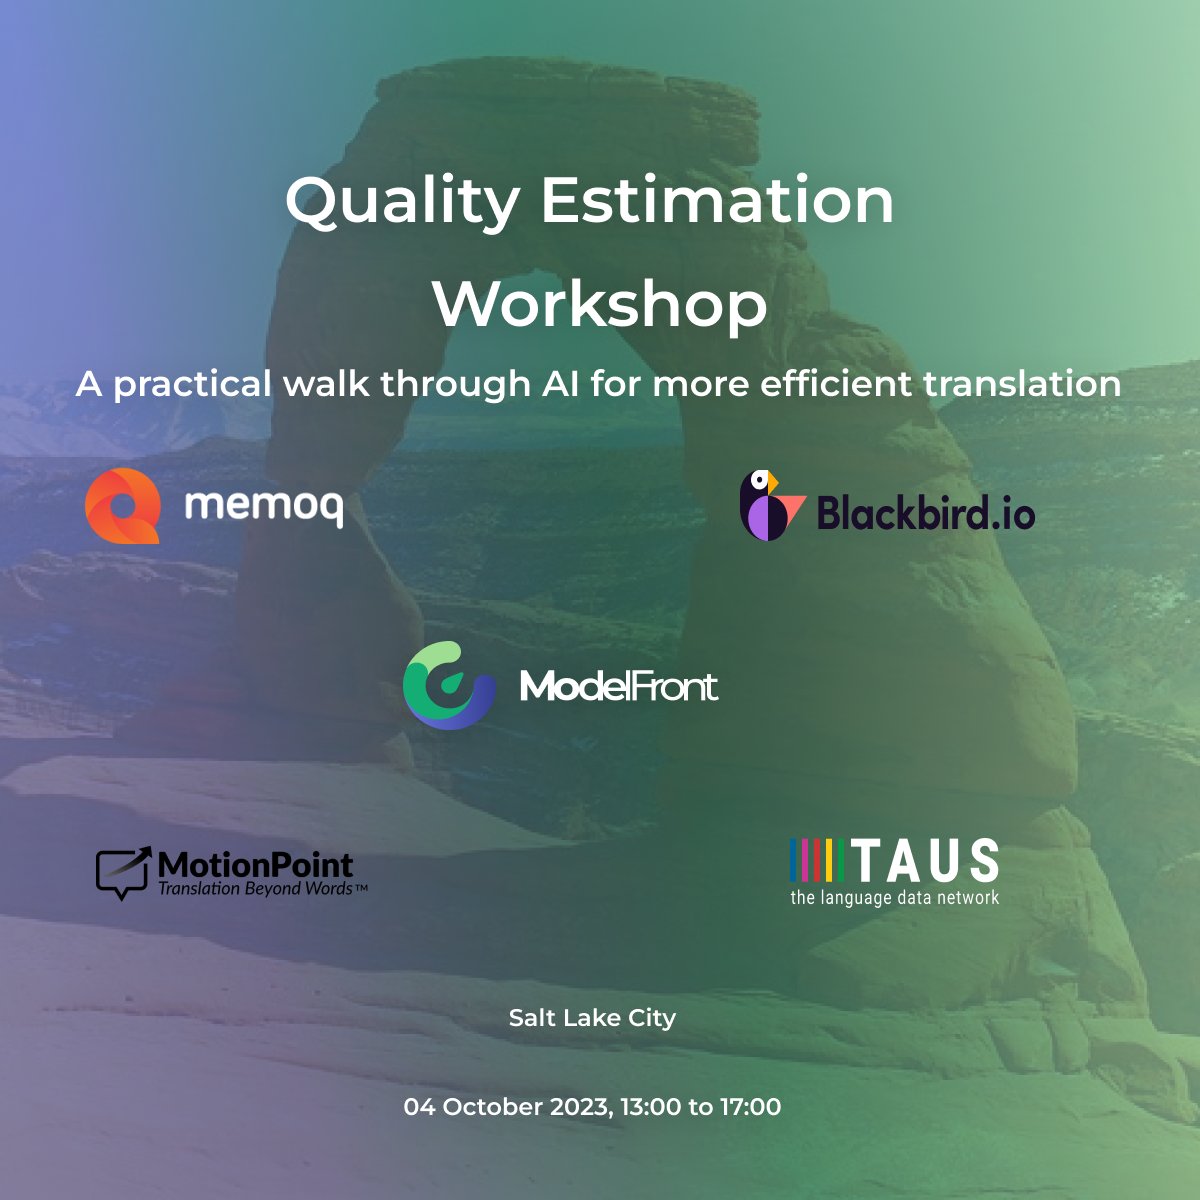 AI for more efficient post-editing? 📈 2023's deepest event on machine translation quality prediction will feature hands-on builders, users and integrators demoing quality prediction in @memoQ_Official and @blackbirdio_hq 🗓️Tomorrow Salt Lake City 🇺🇸 taus.net/events/confere…